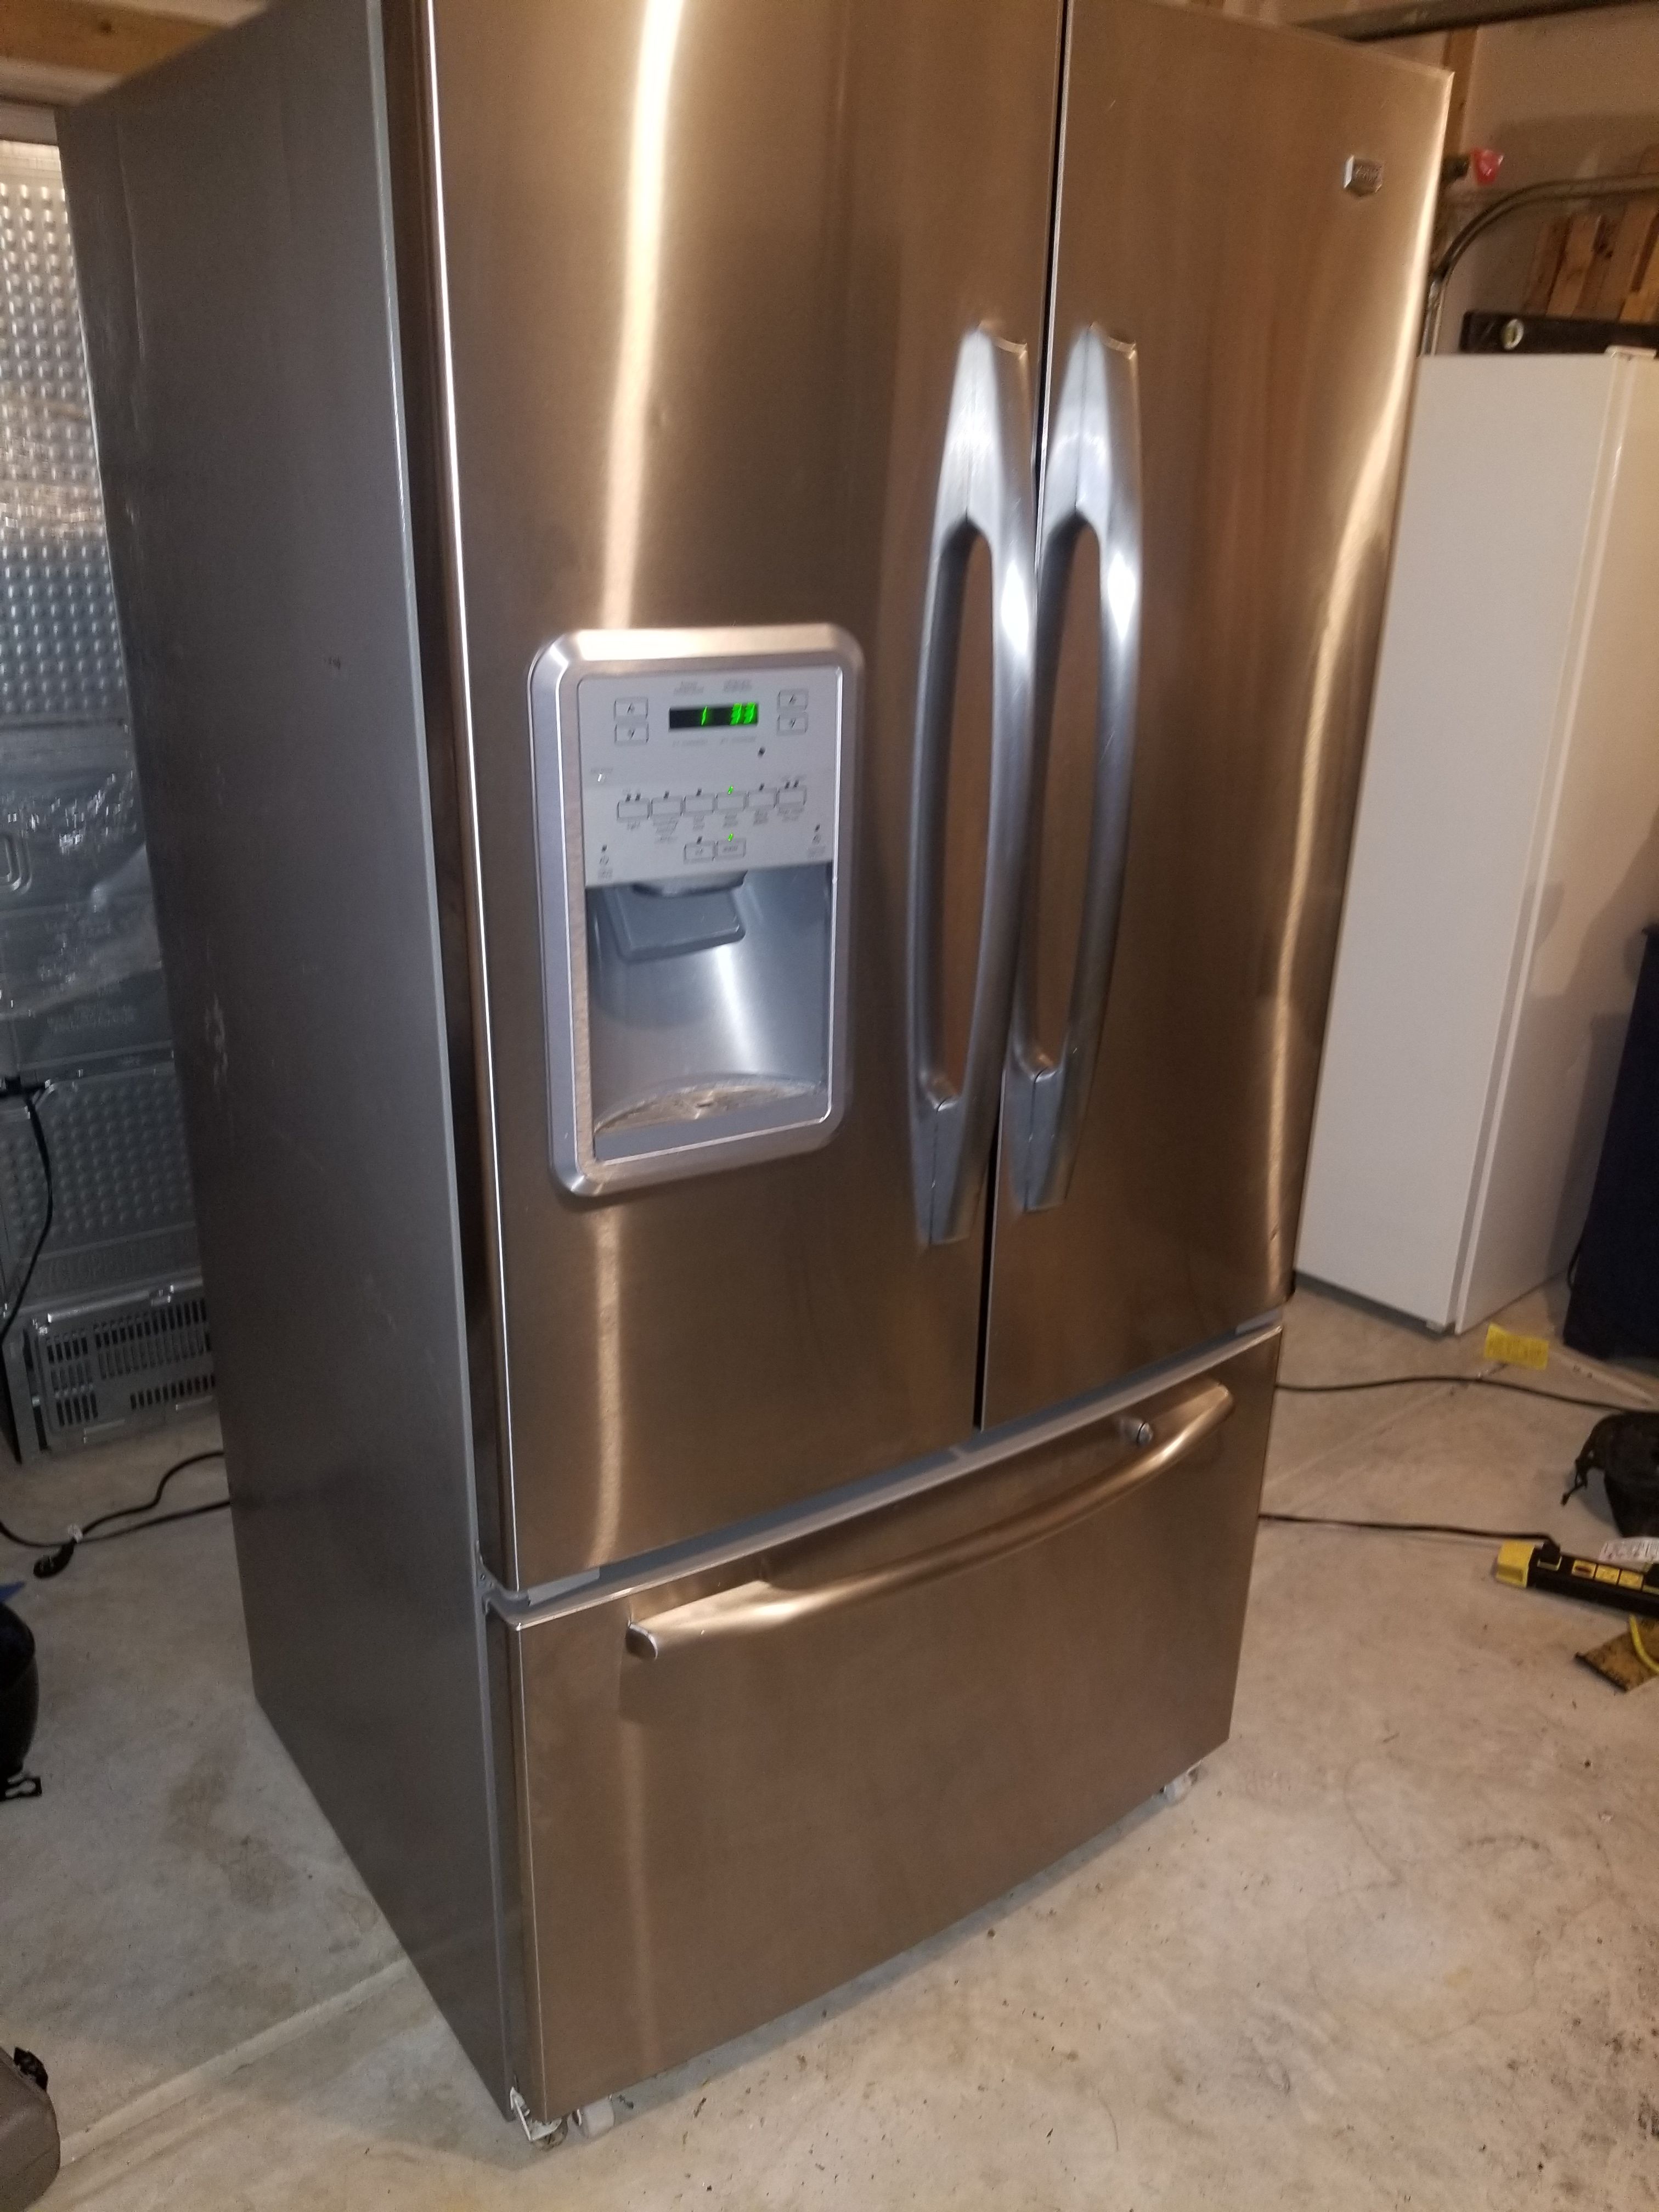 Maytag stainless steel refrigerator and freezer